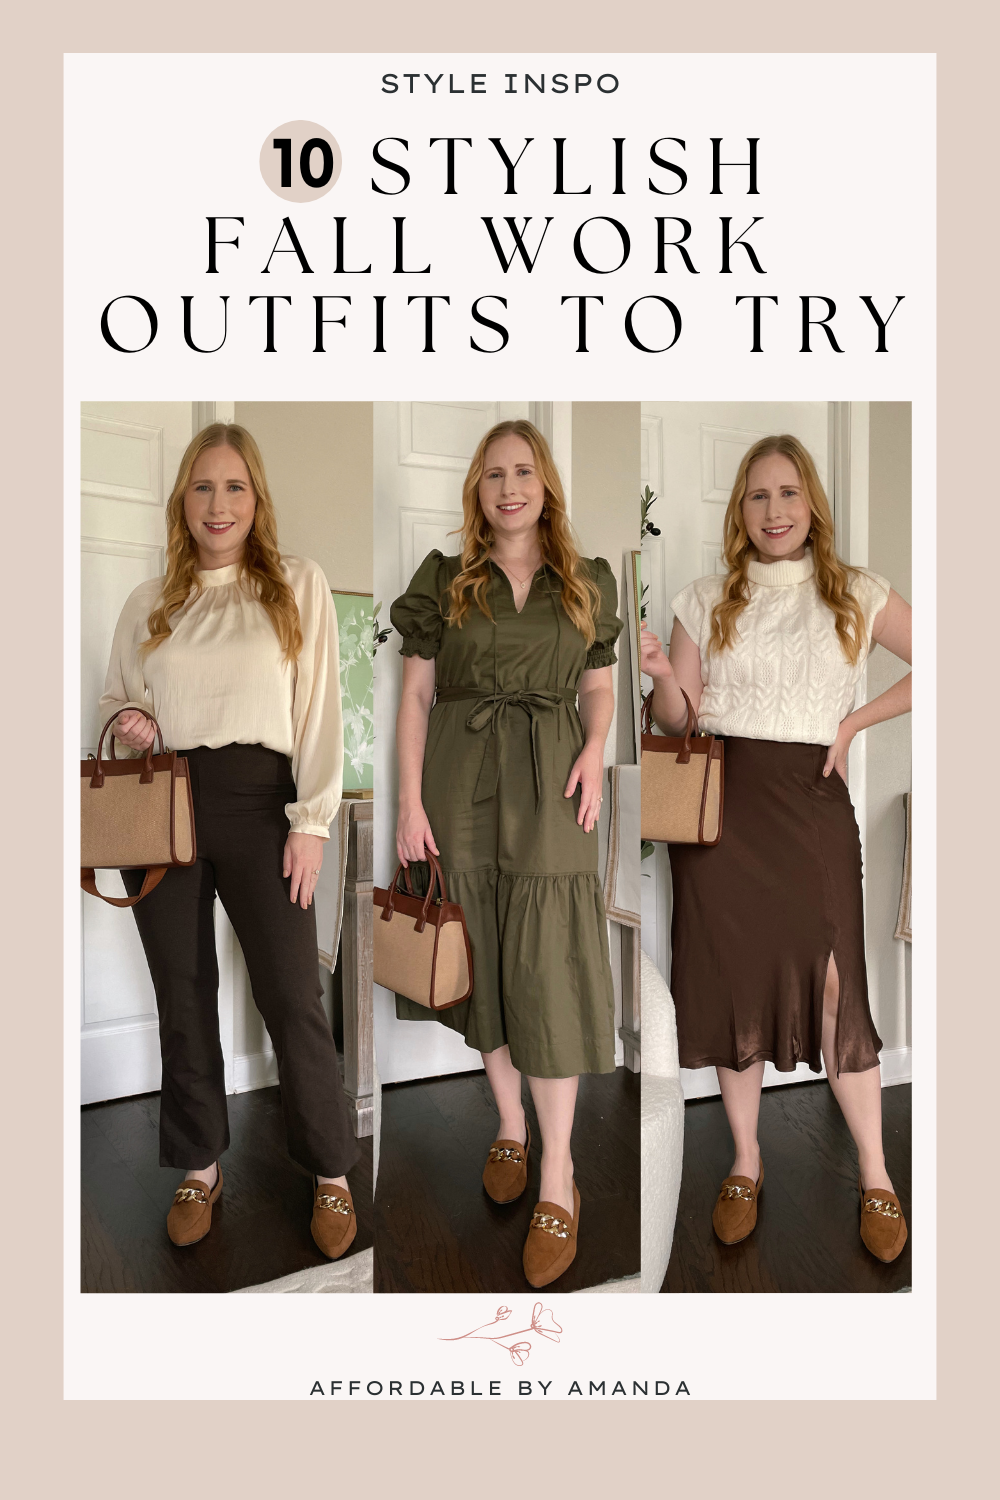 5 Affordable Fall Outfits from Walmart - Affordable by Amanda